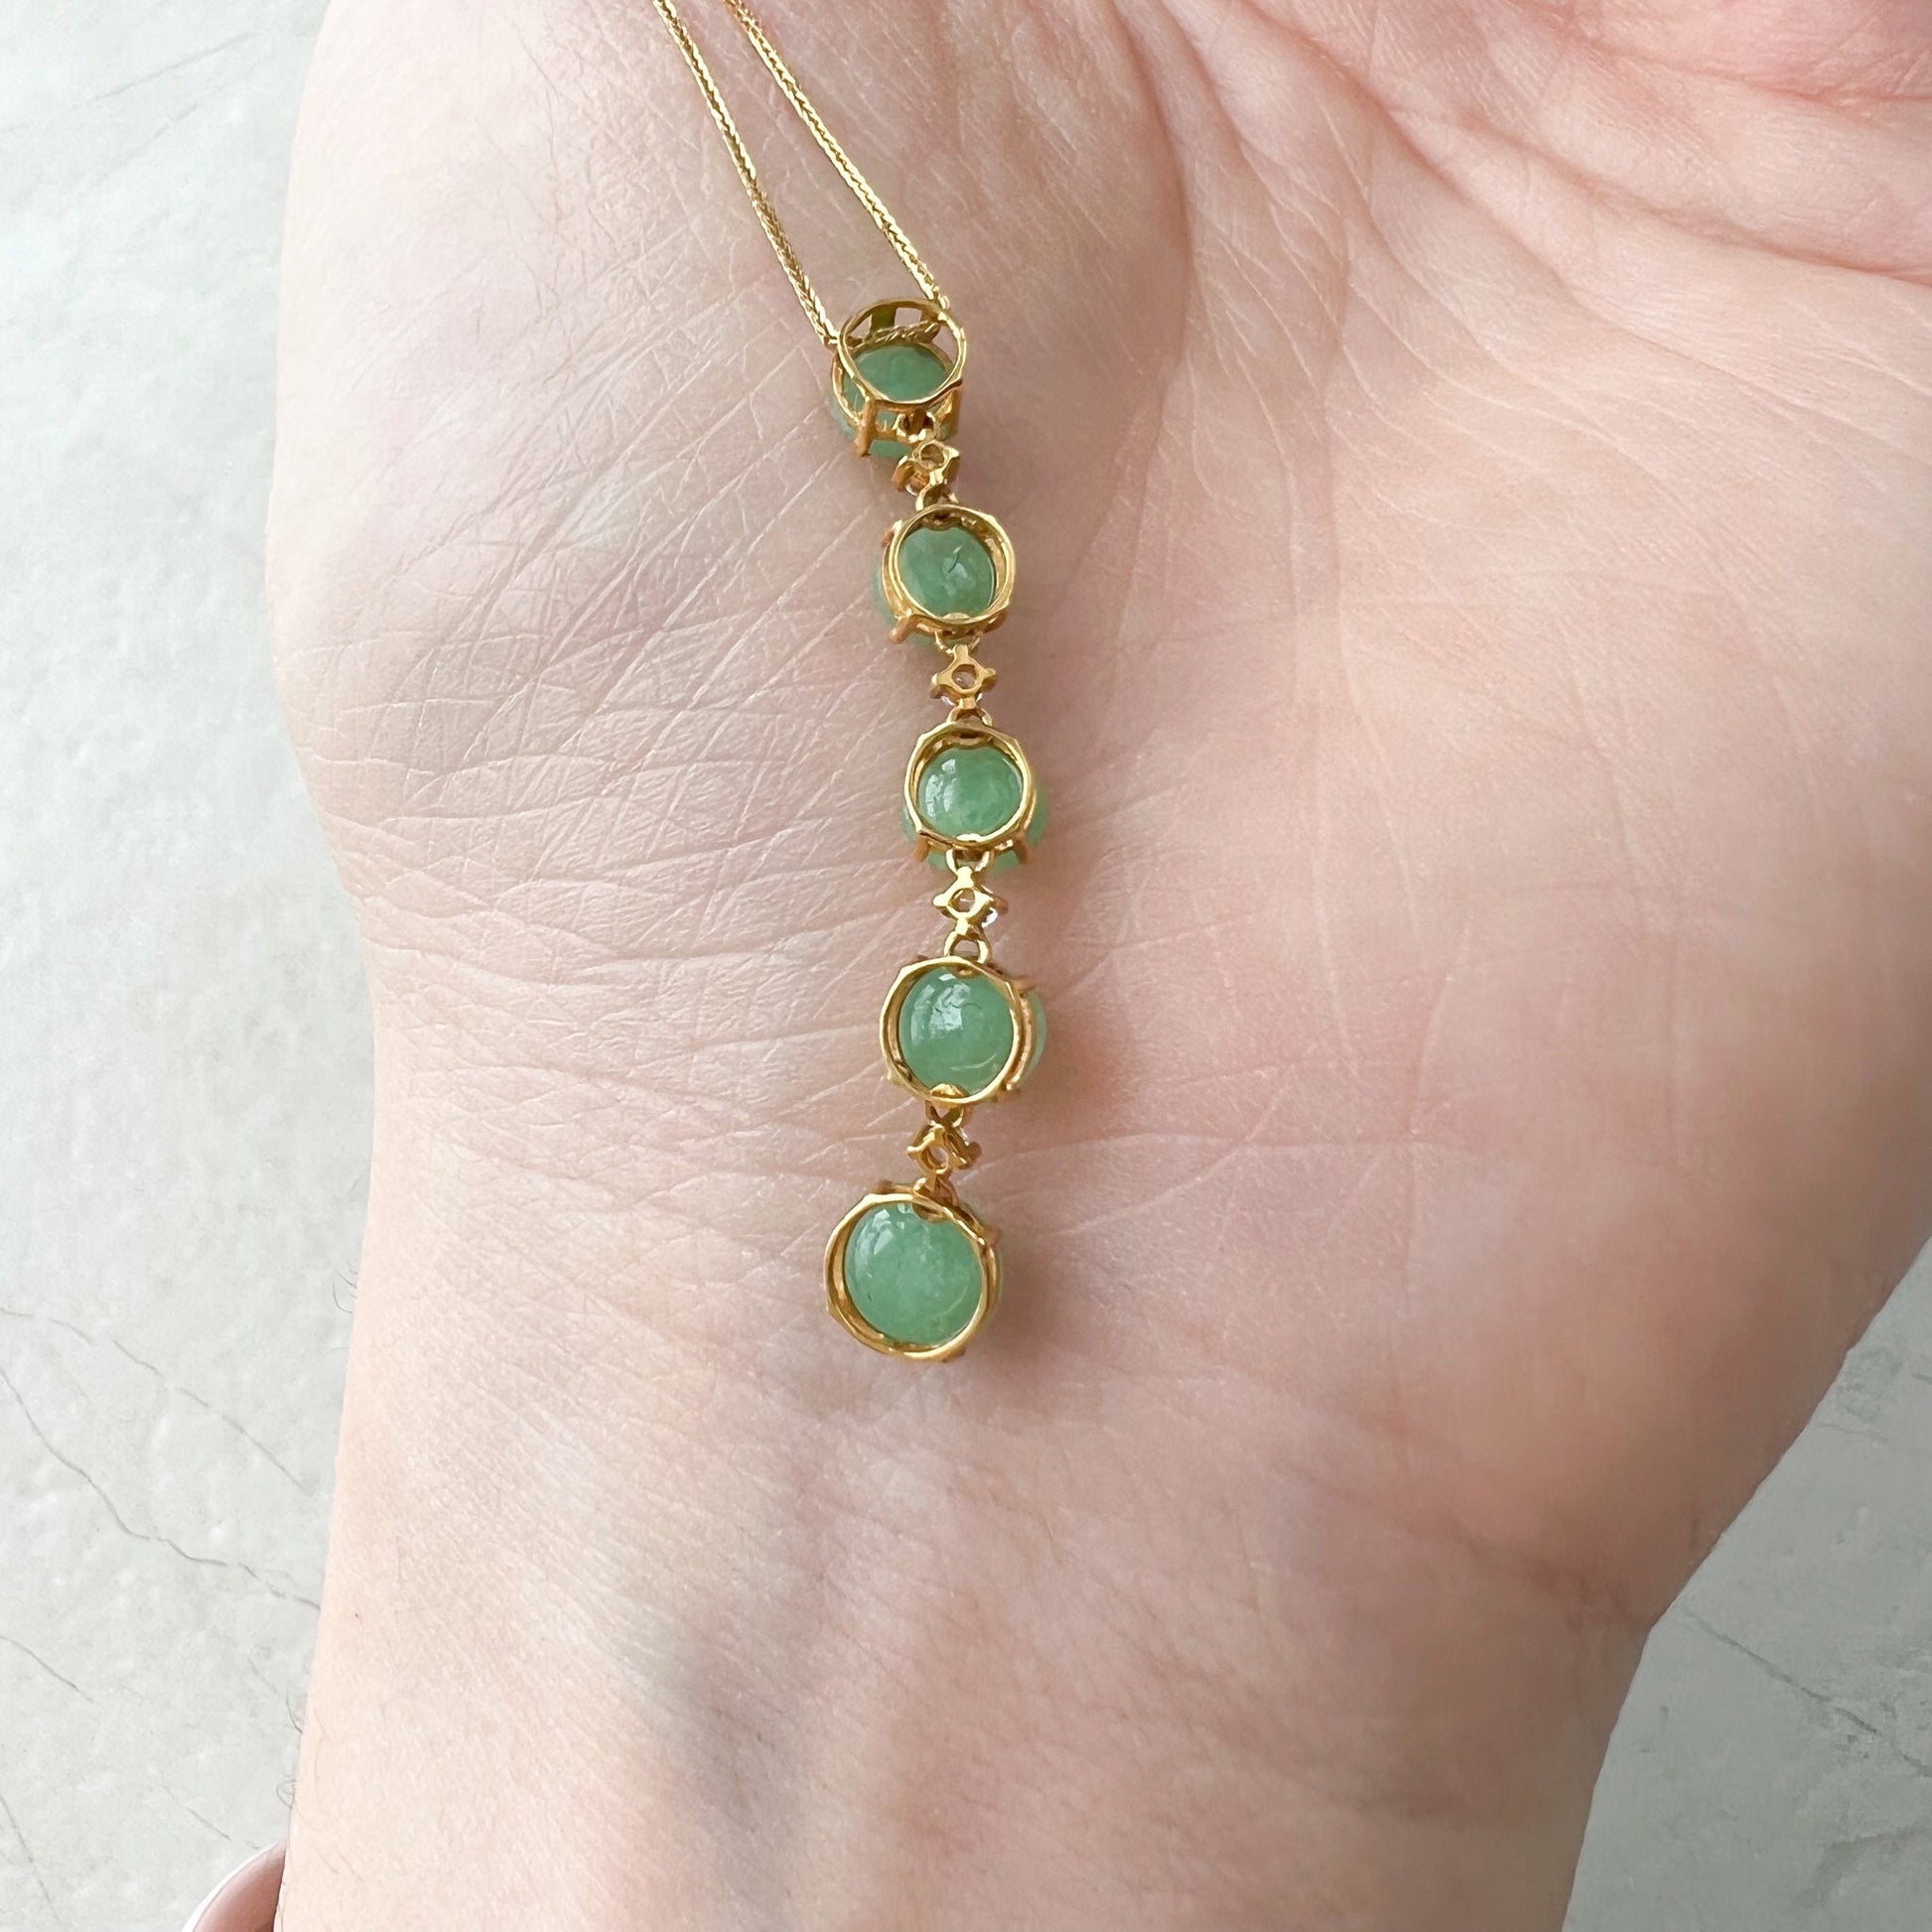 Small Green Jade Column Pendant, Jadeite Jade, Pendant only, 18K Gold Frame, Dainty Pendant Necklace, QY-0921-1646848657 - AriaDesignCollection